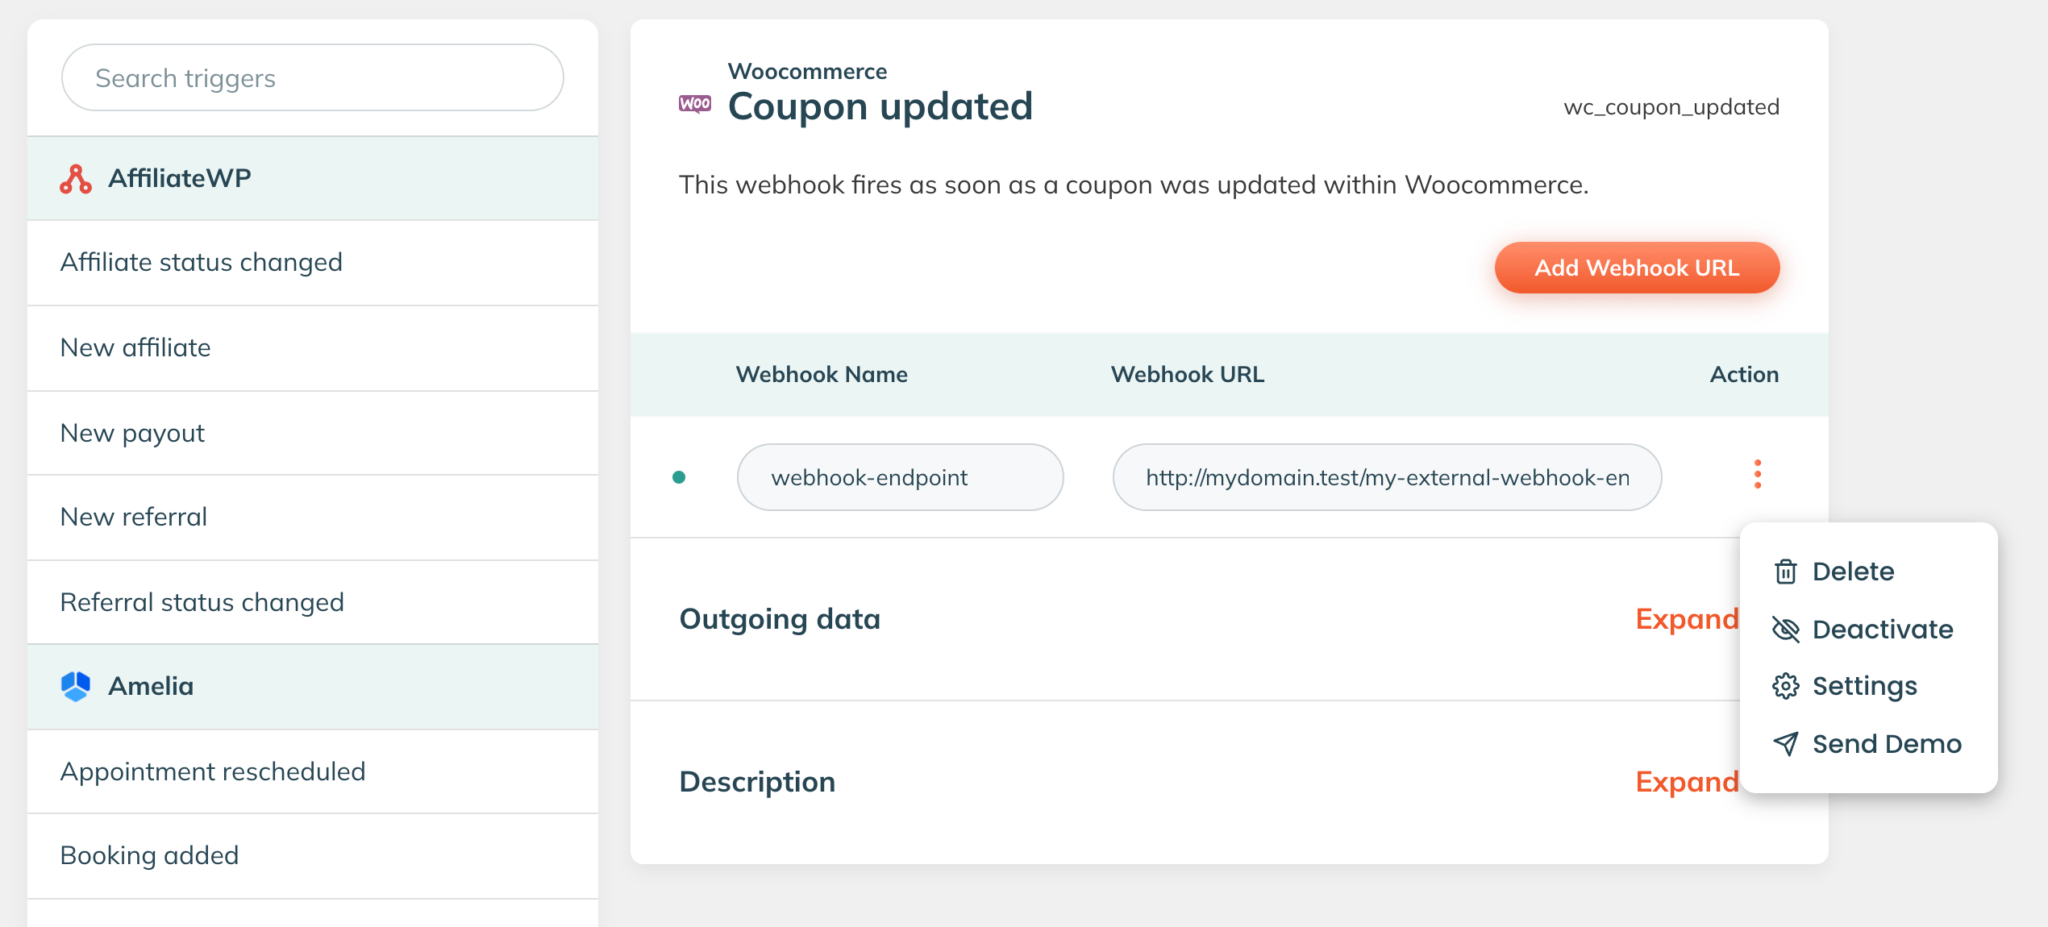 The WP Webhooks screen of the Donation preapproved trigger